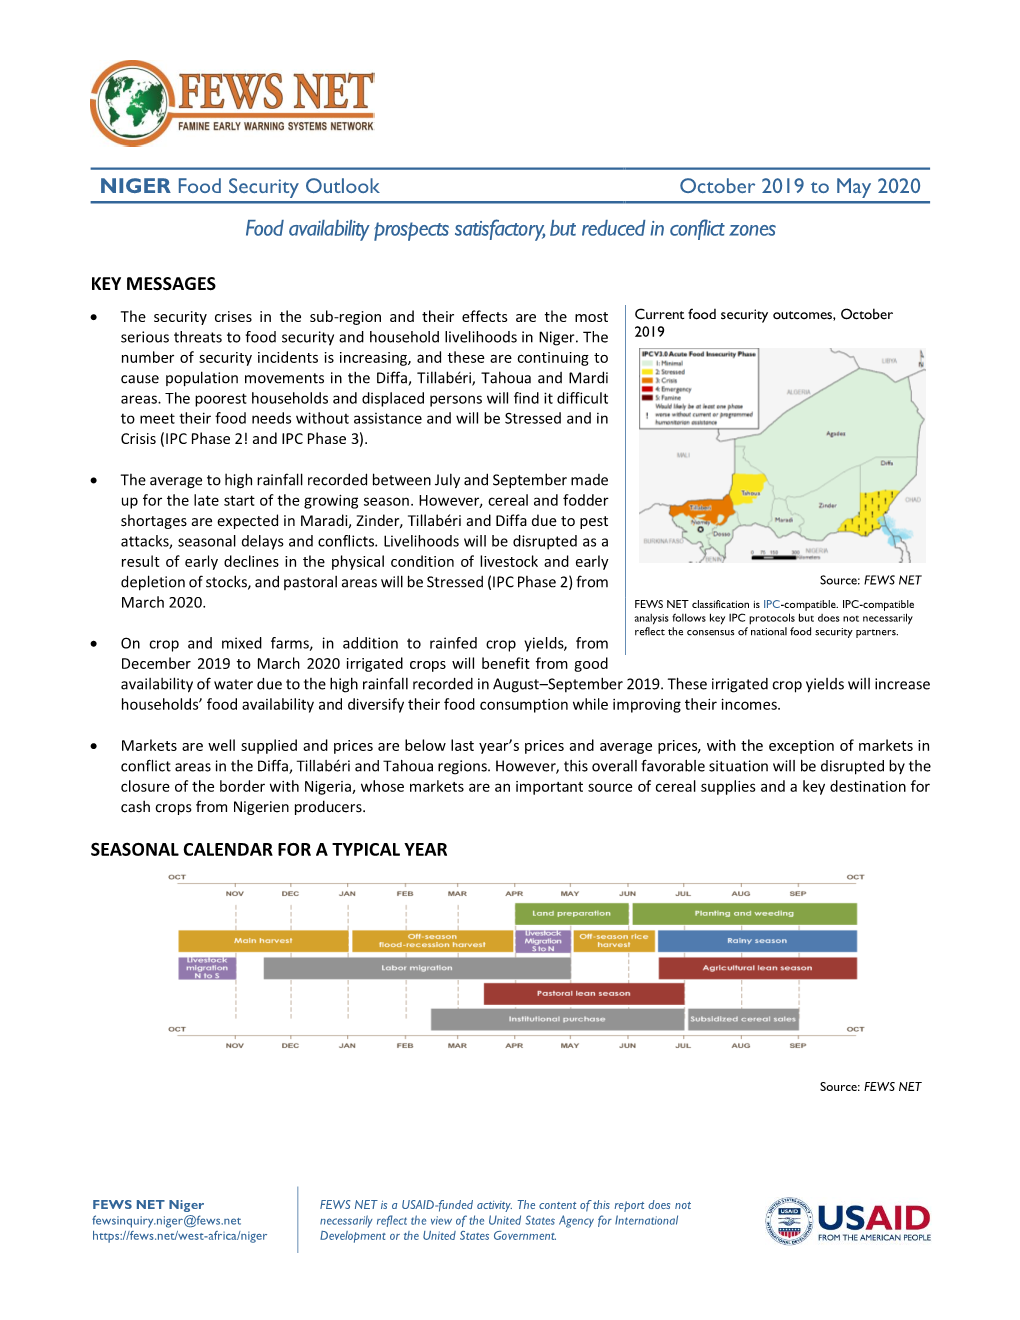 October 2019 to May 2020 Food Availability Prospects Satisfactory, but Reduced in Conflict Zones